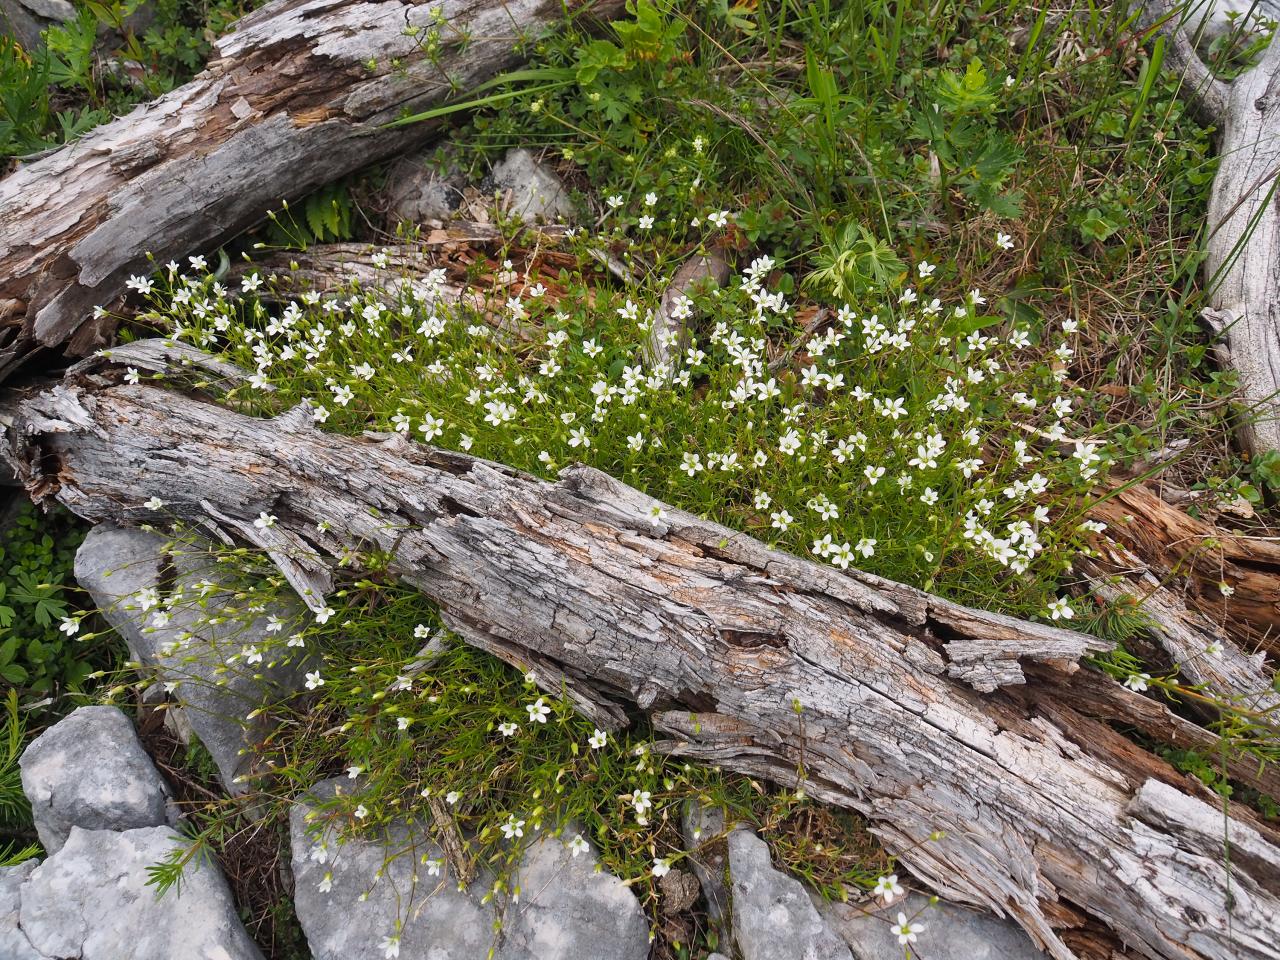 Young alpine plants sprout under lying deadwood